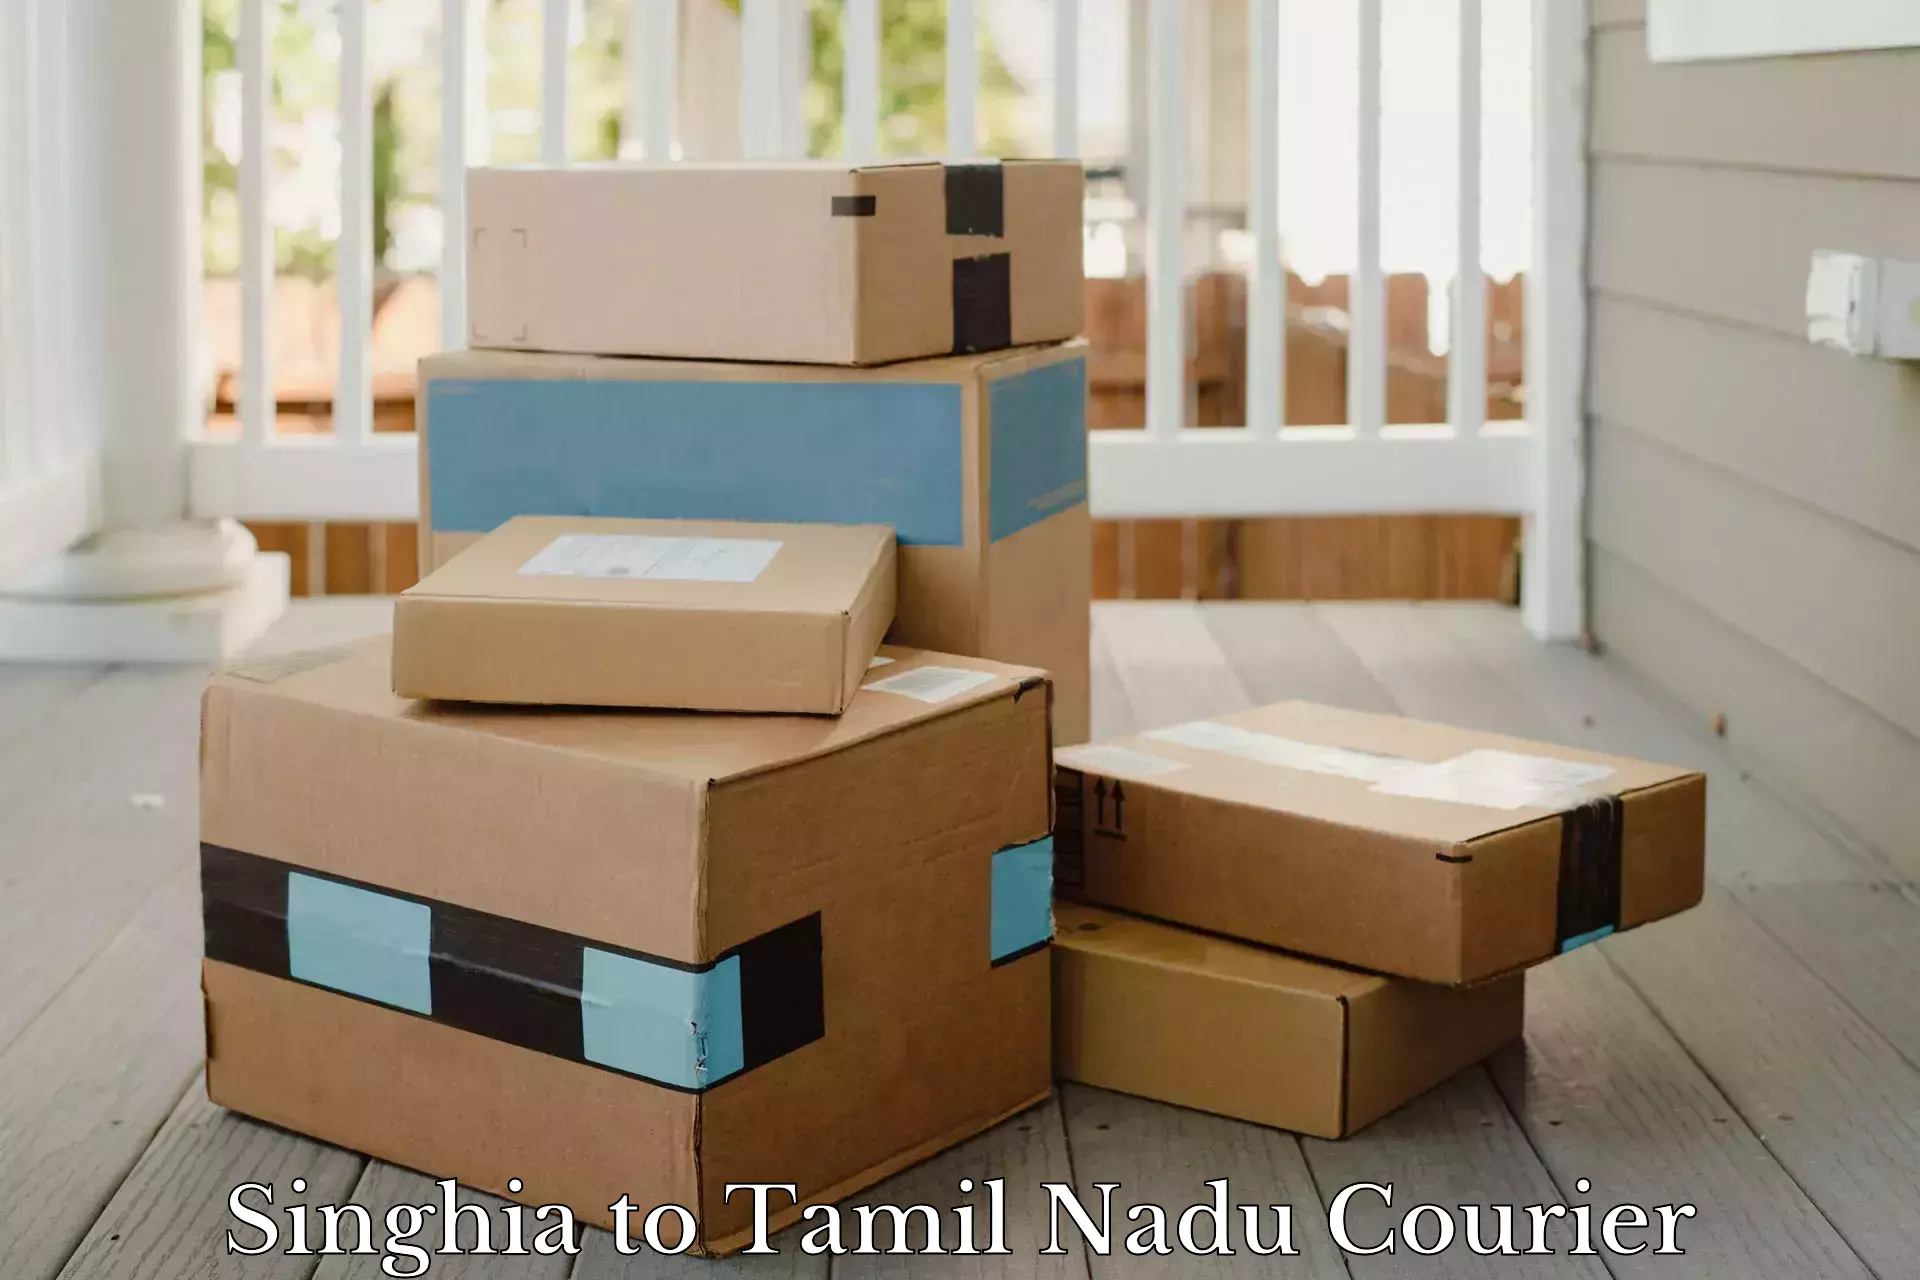 Reliable shipping partners Singhia to Tamil Nadu